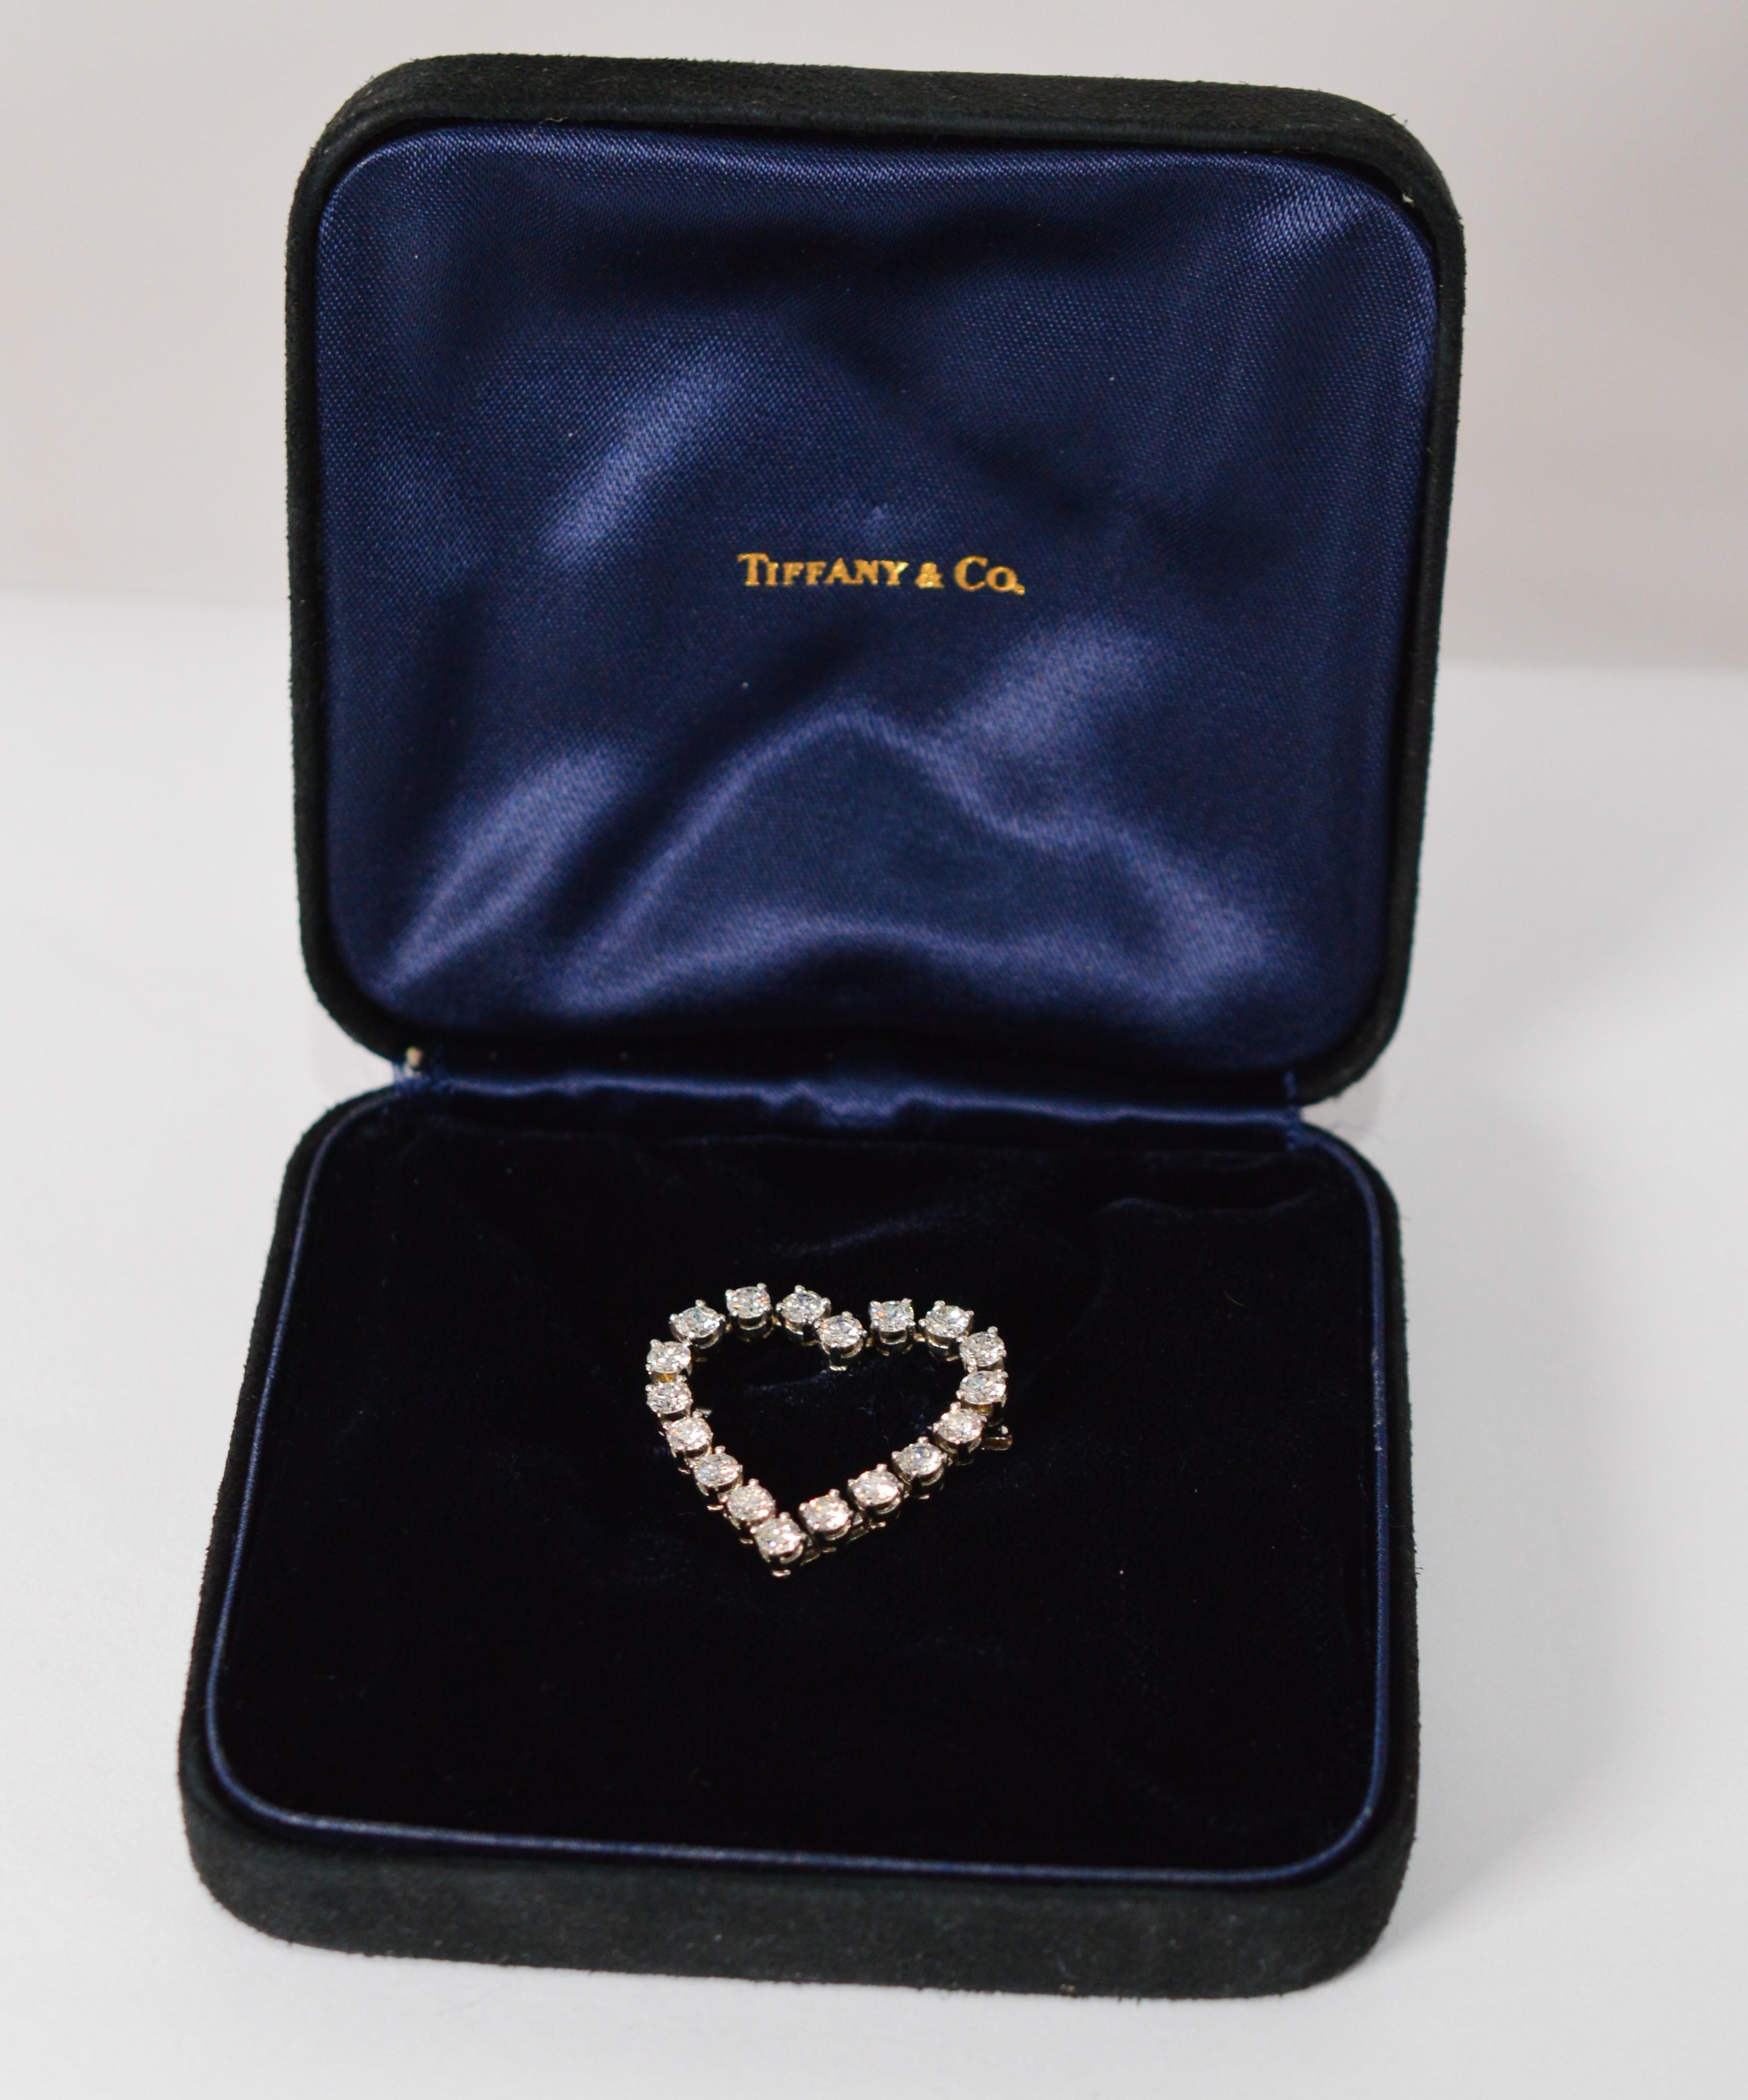 Please your sweetheart with this brilliant vintage Tiffany & Company .900 platinum heart-shaped brooch displaying eighteen G/VS round fine white cut diamonds. Diamonds weight estimated 2.50 carat total weight. The brooch measures 27 mm x 26.79 mm